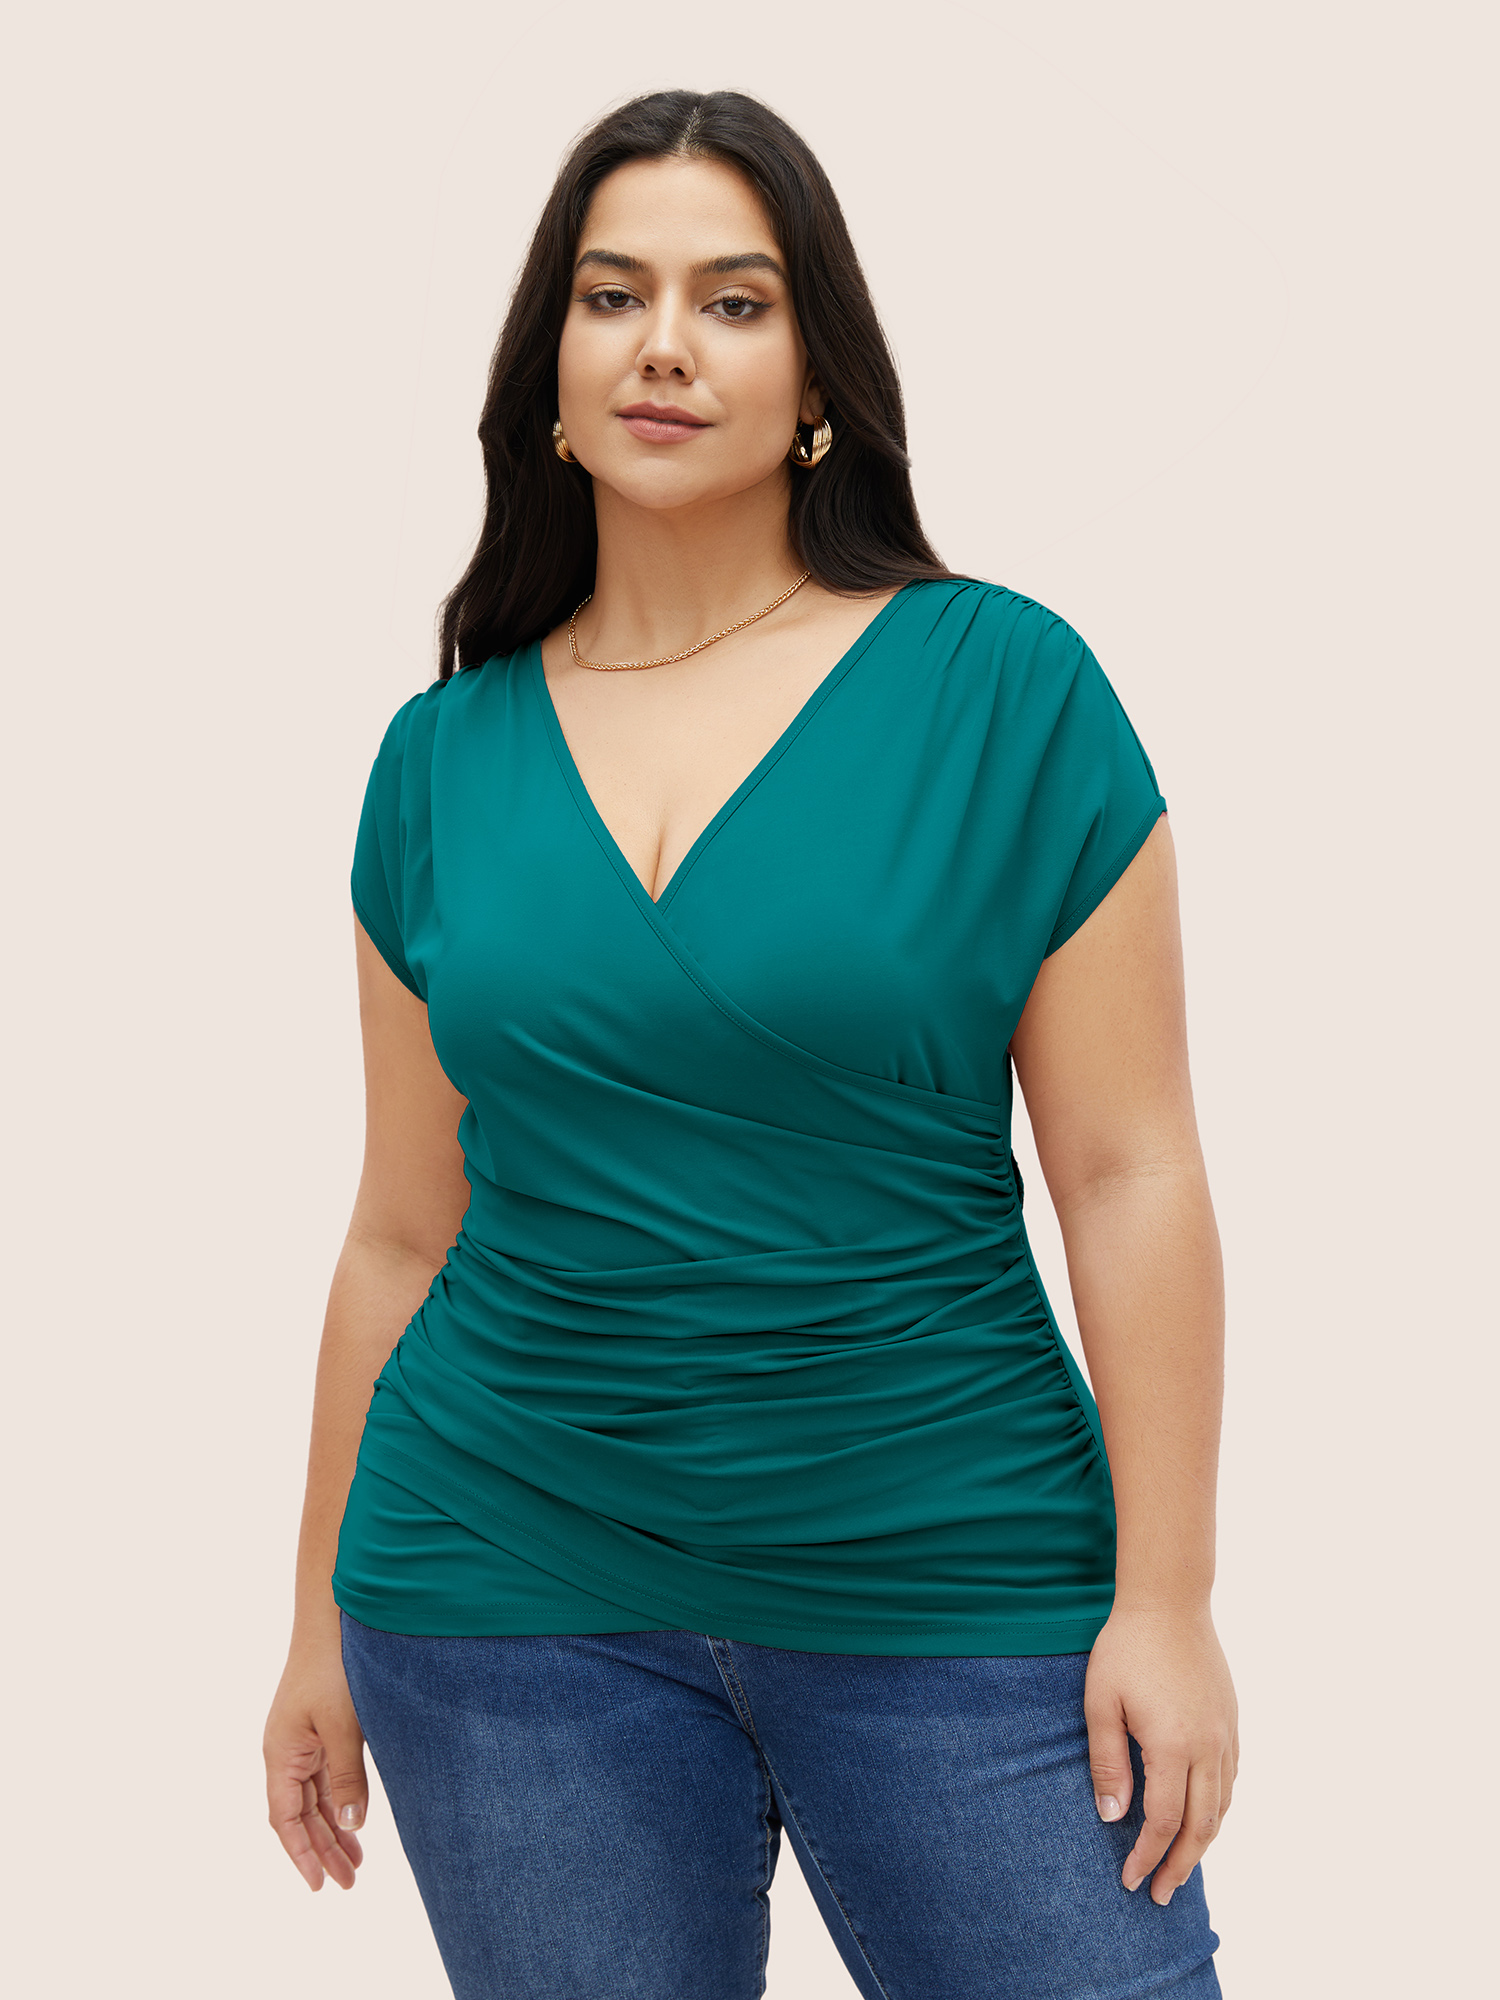 

Plus Size Plain Ruched Overlap Collar Dolman Sleeve Knit Top Teal Women Elegant Overlapping Deep V-neck Everyday T-shirts BloomChic